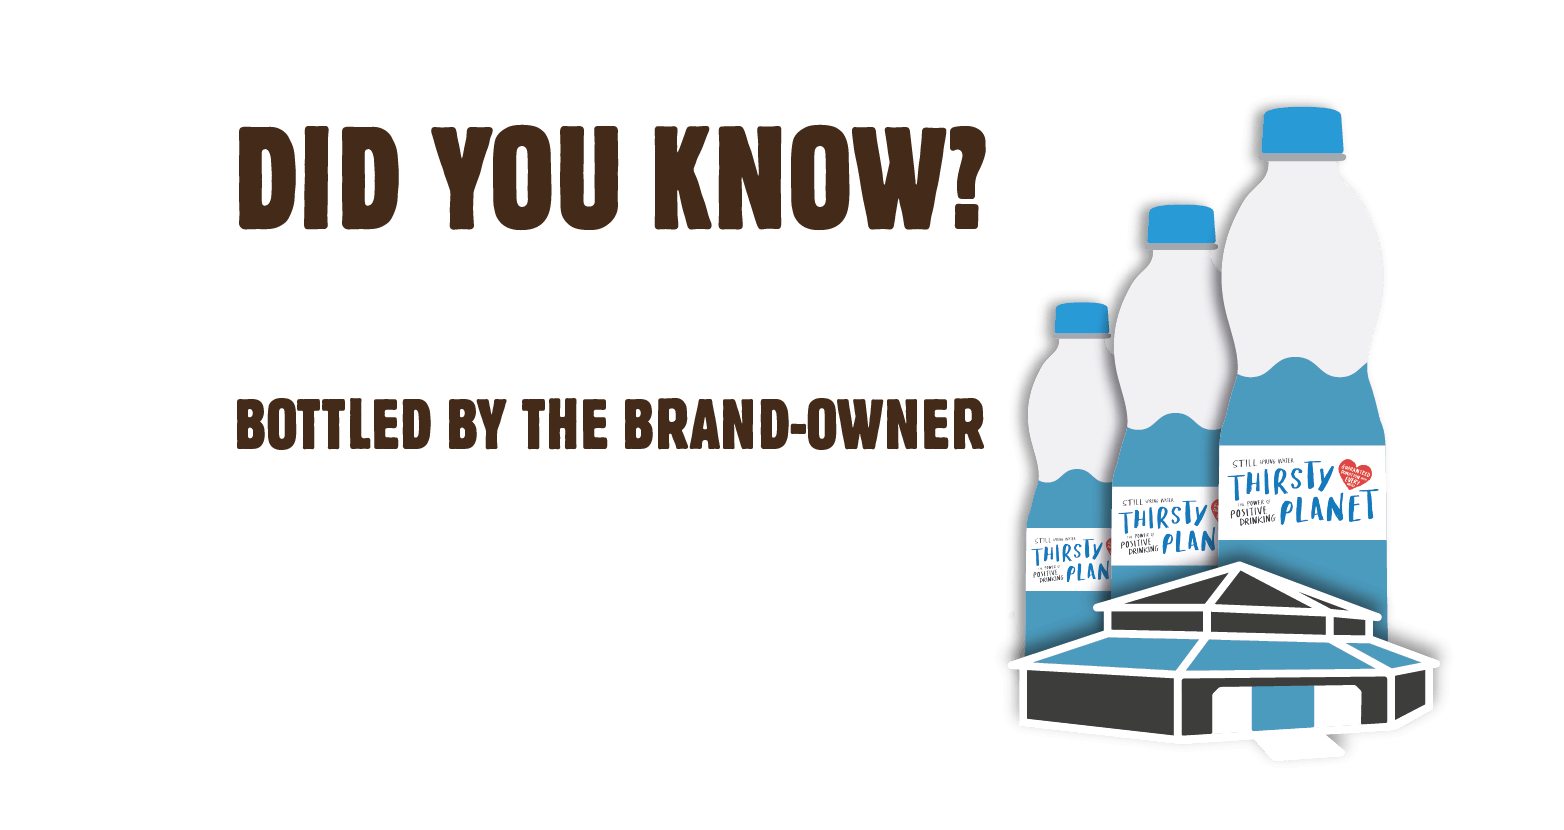 Did you know? Thirsty planet is the only charity water which is actually bottled by the brand owner.